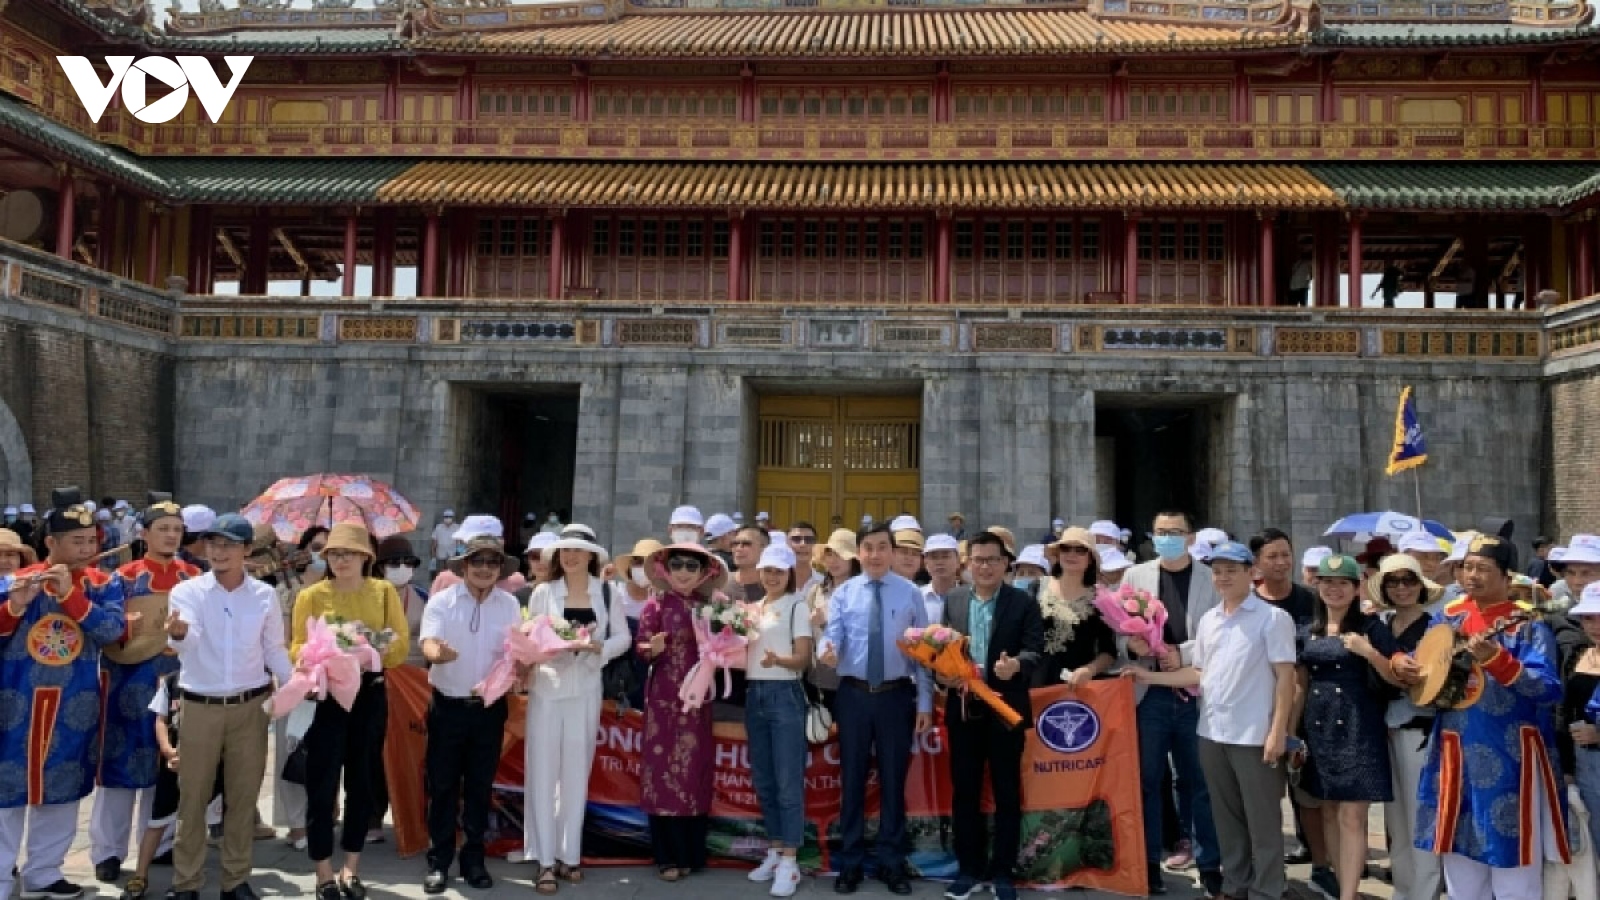 Thua Thien-Hue welcomes 1,000 MICE visitors